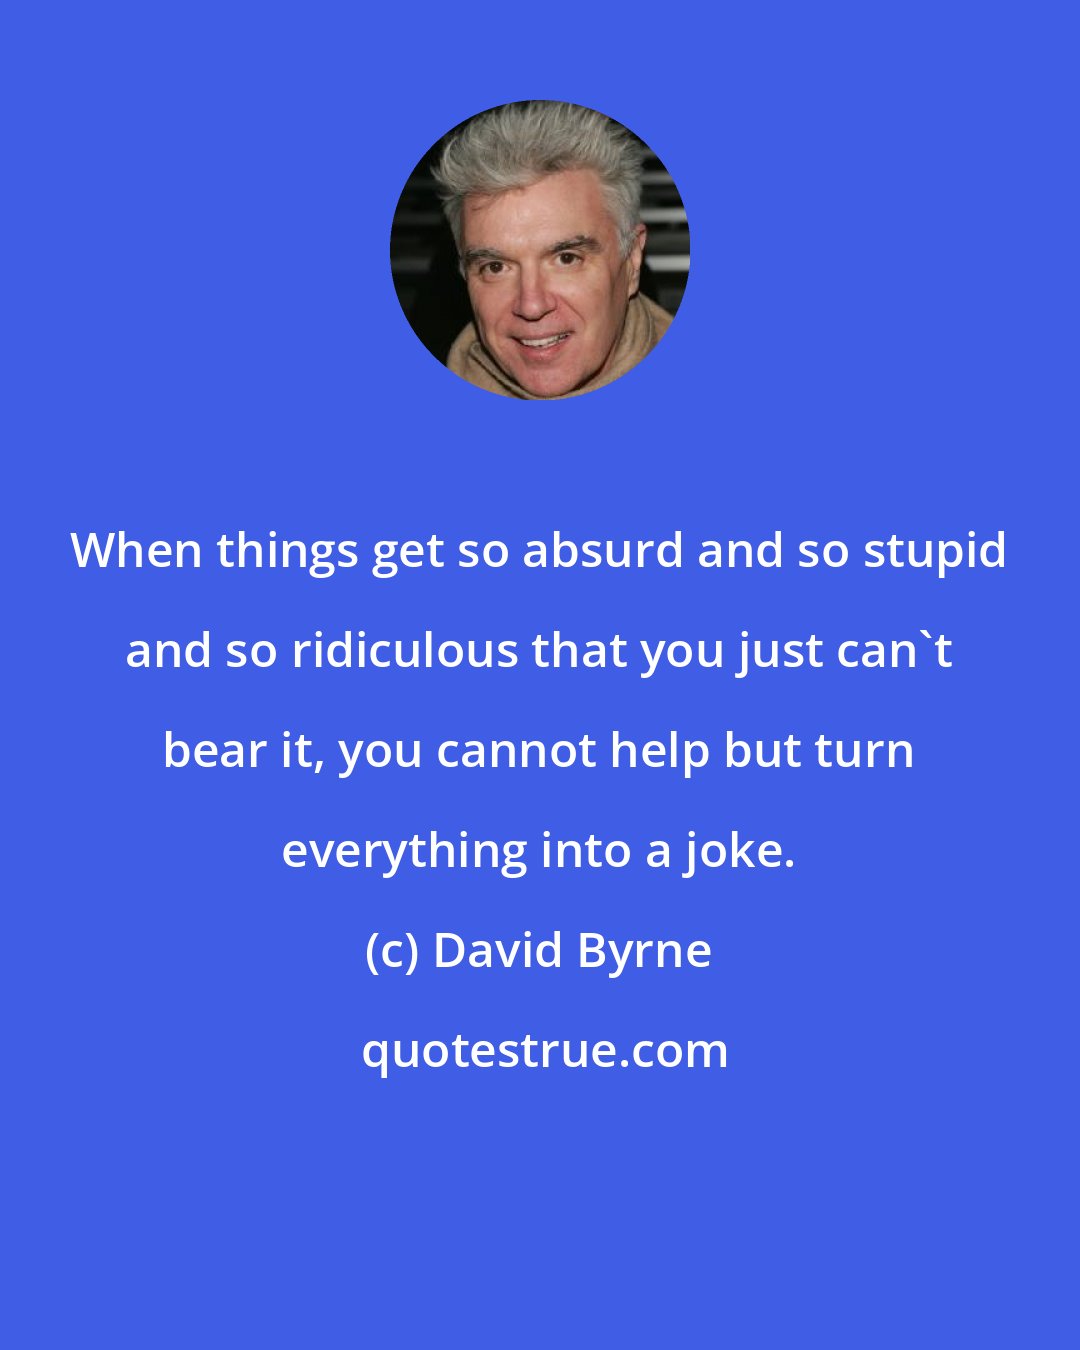 David Byrne: When things get so absurd and so stupid and so ridiculous that you just can't bear it, you cannot help but turn everything into a joke.